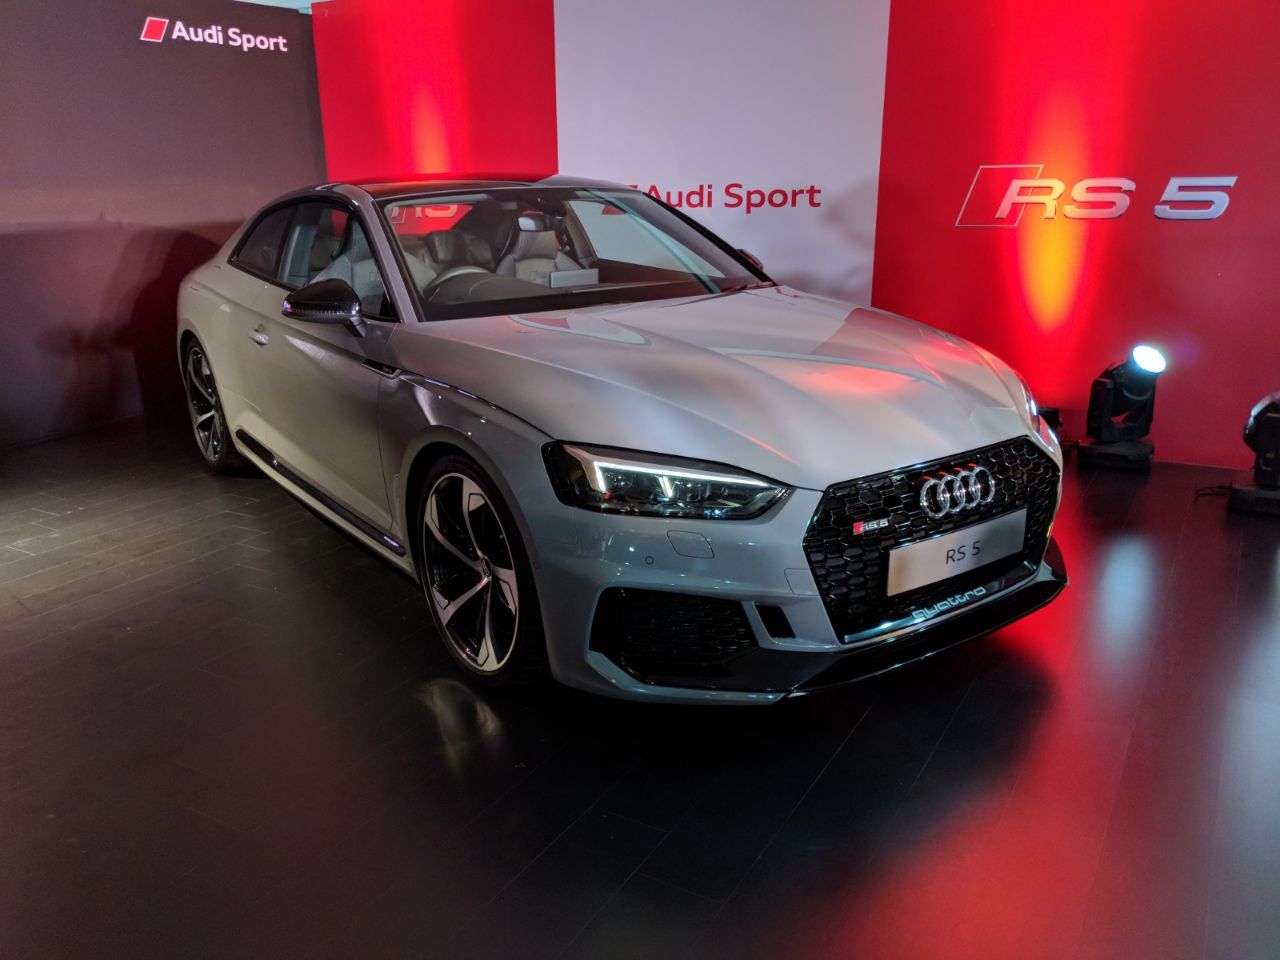 Audi RS 5 Coupe launched in India